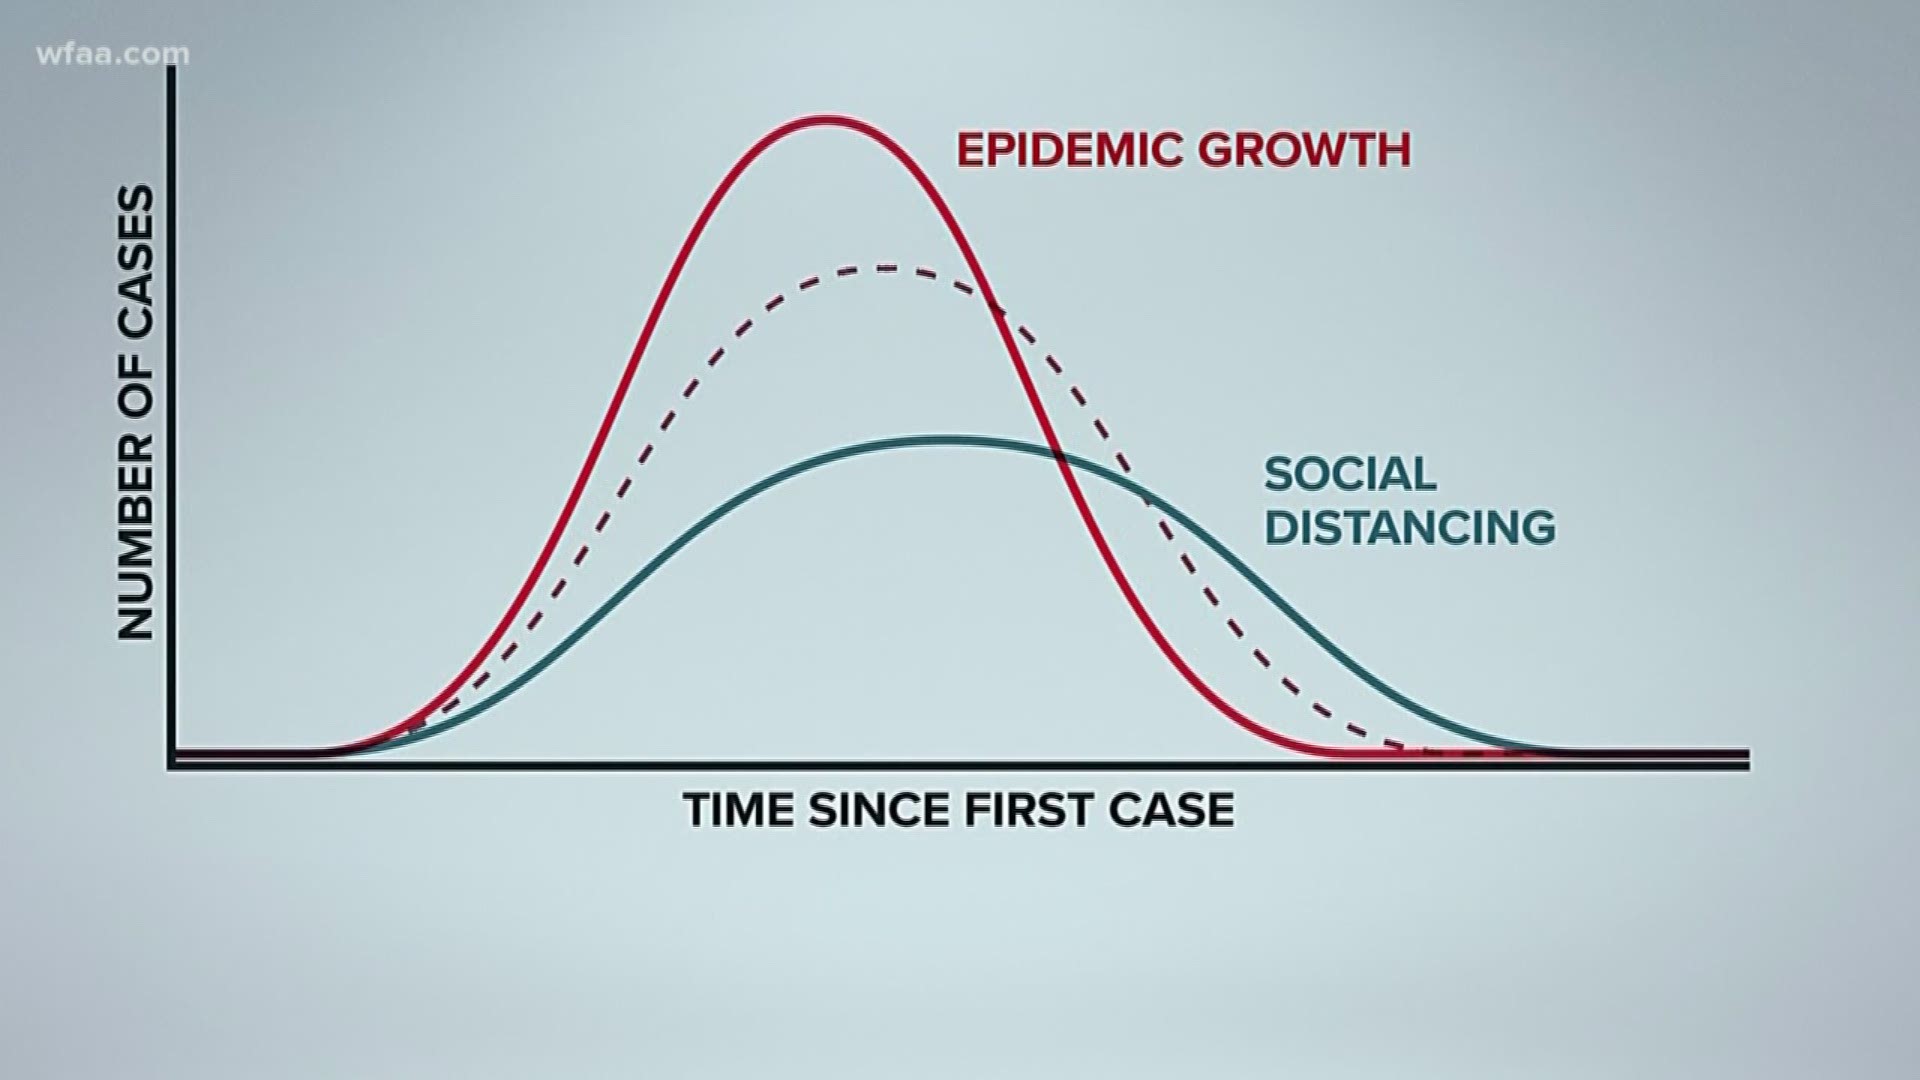 WFAA's Sonia Azad breaks down why social distancing is important to flattening the curve amid an outbreak like COVID-19.